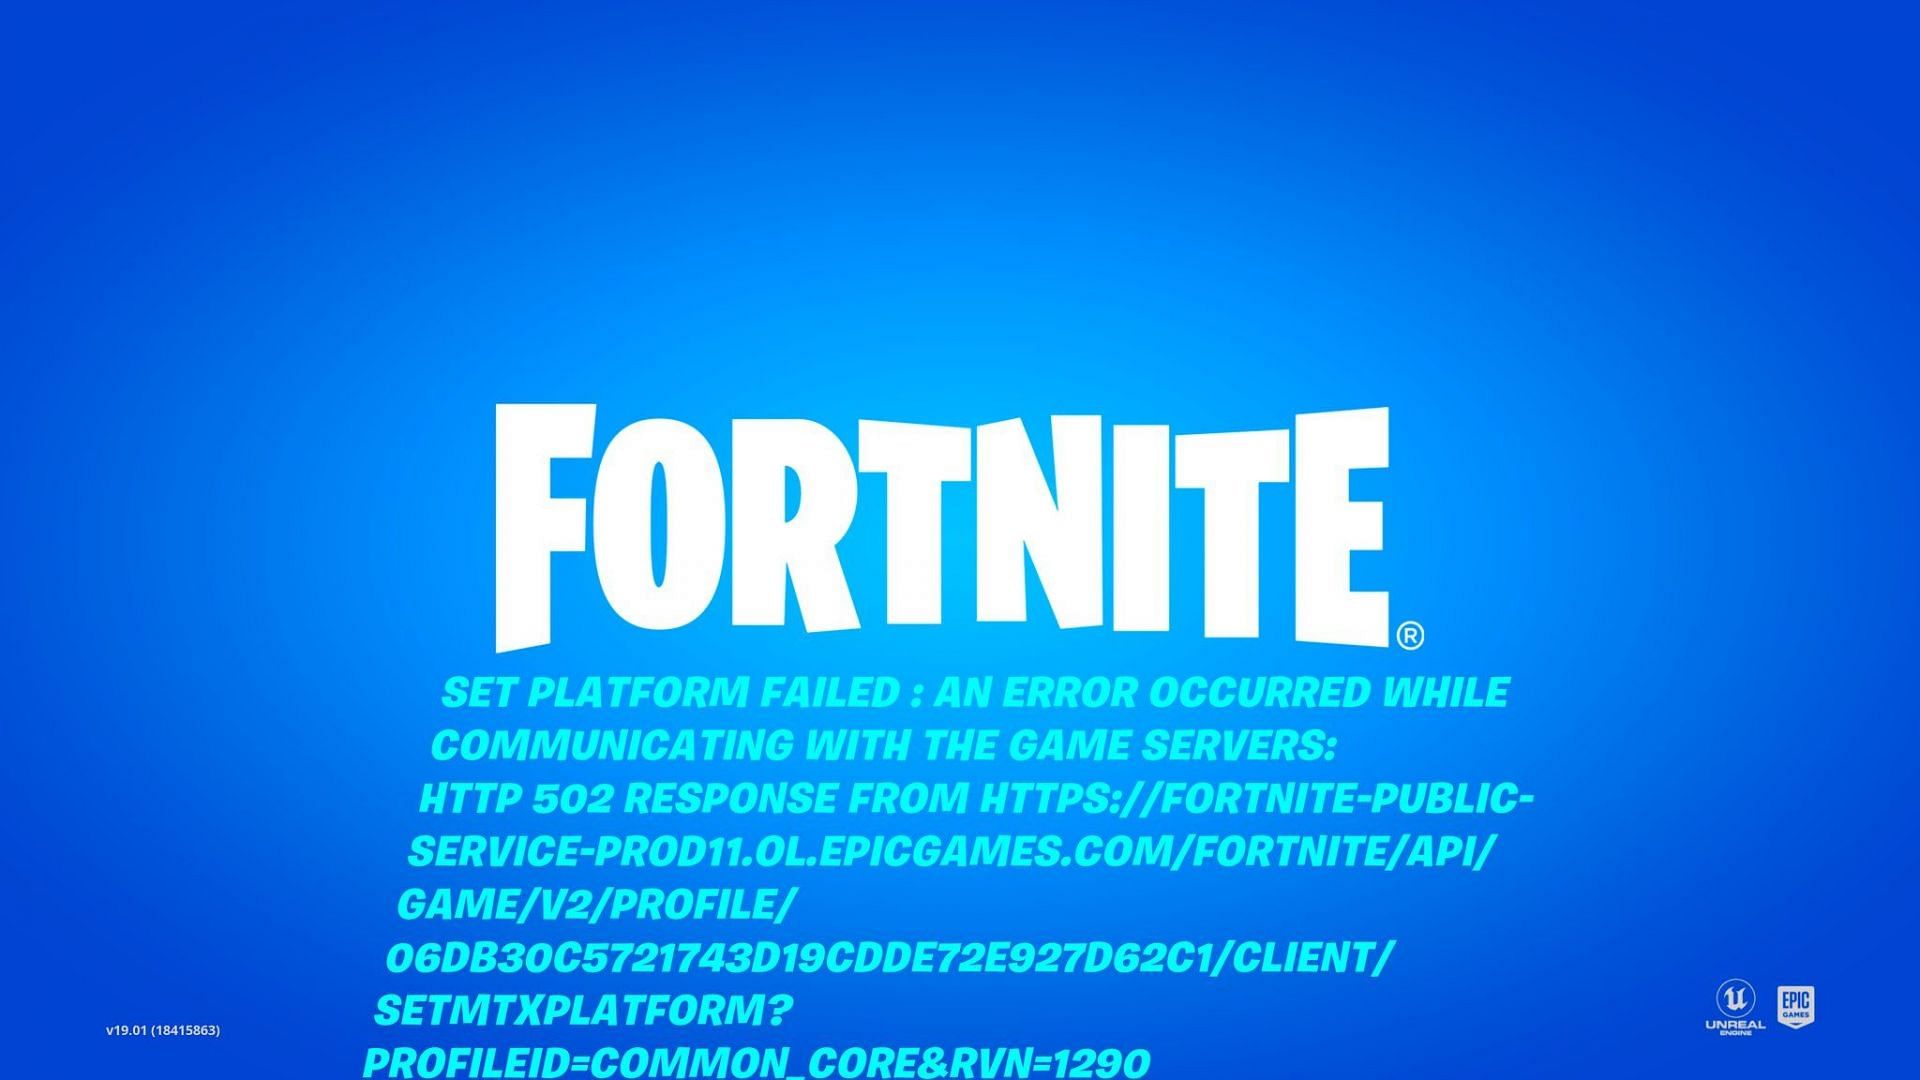 Are Fortnite servers down right now? (29th December, 2021)